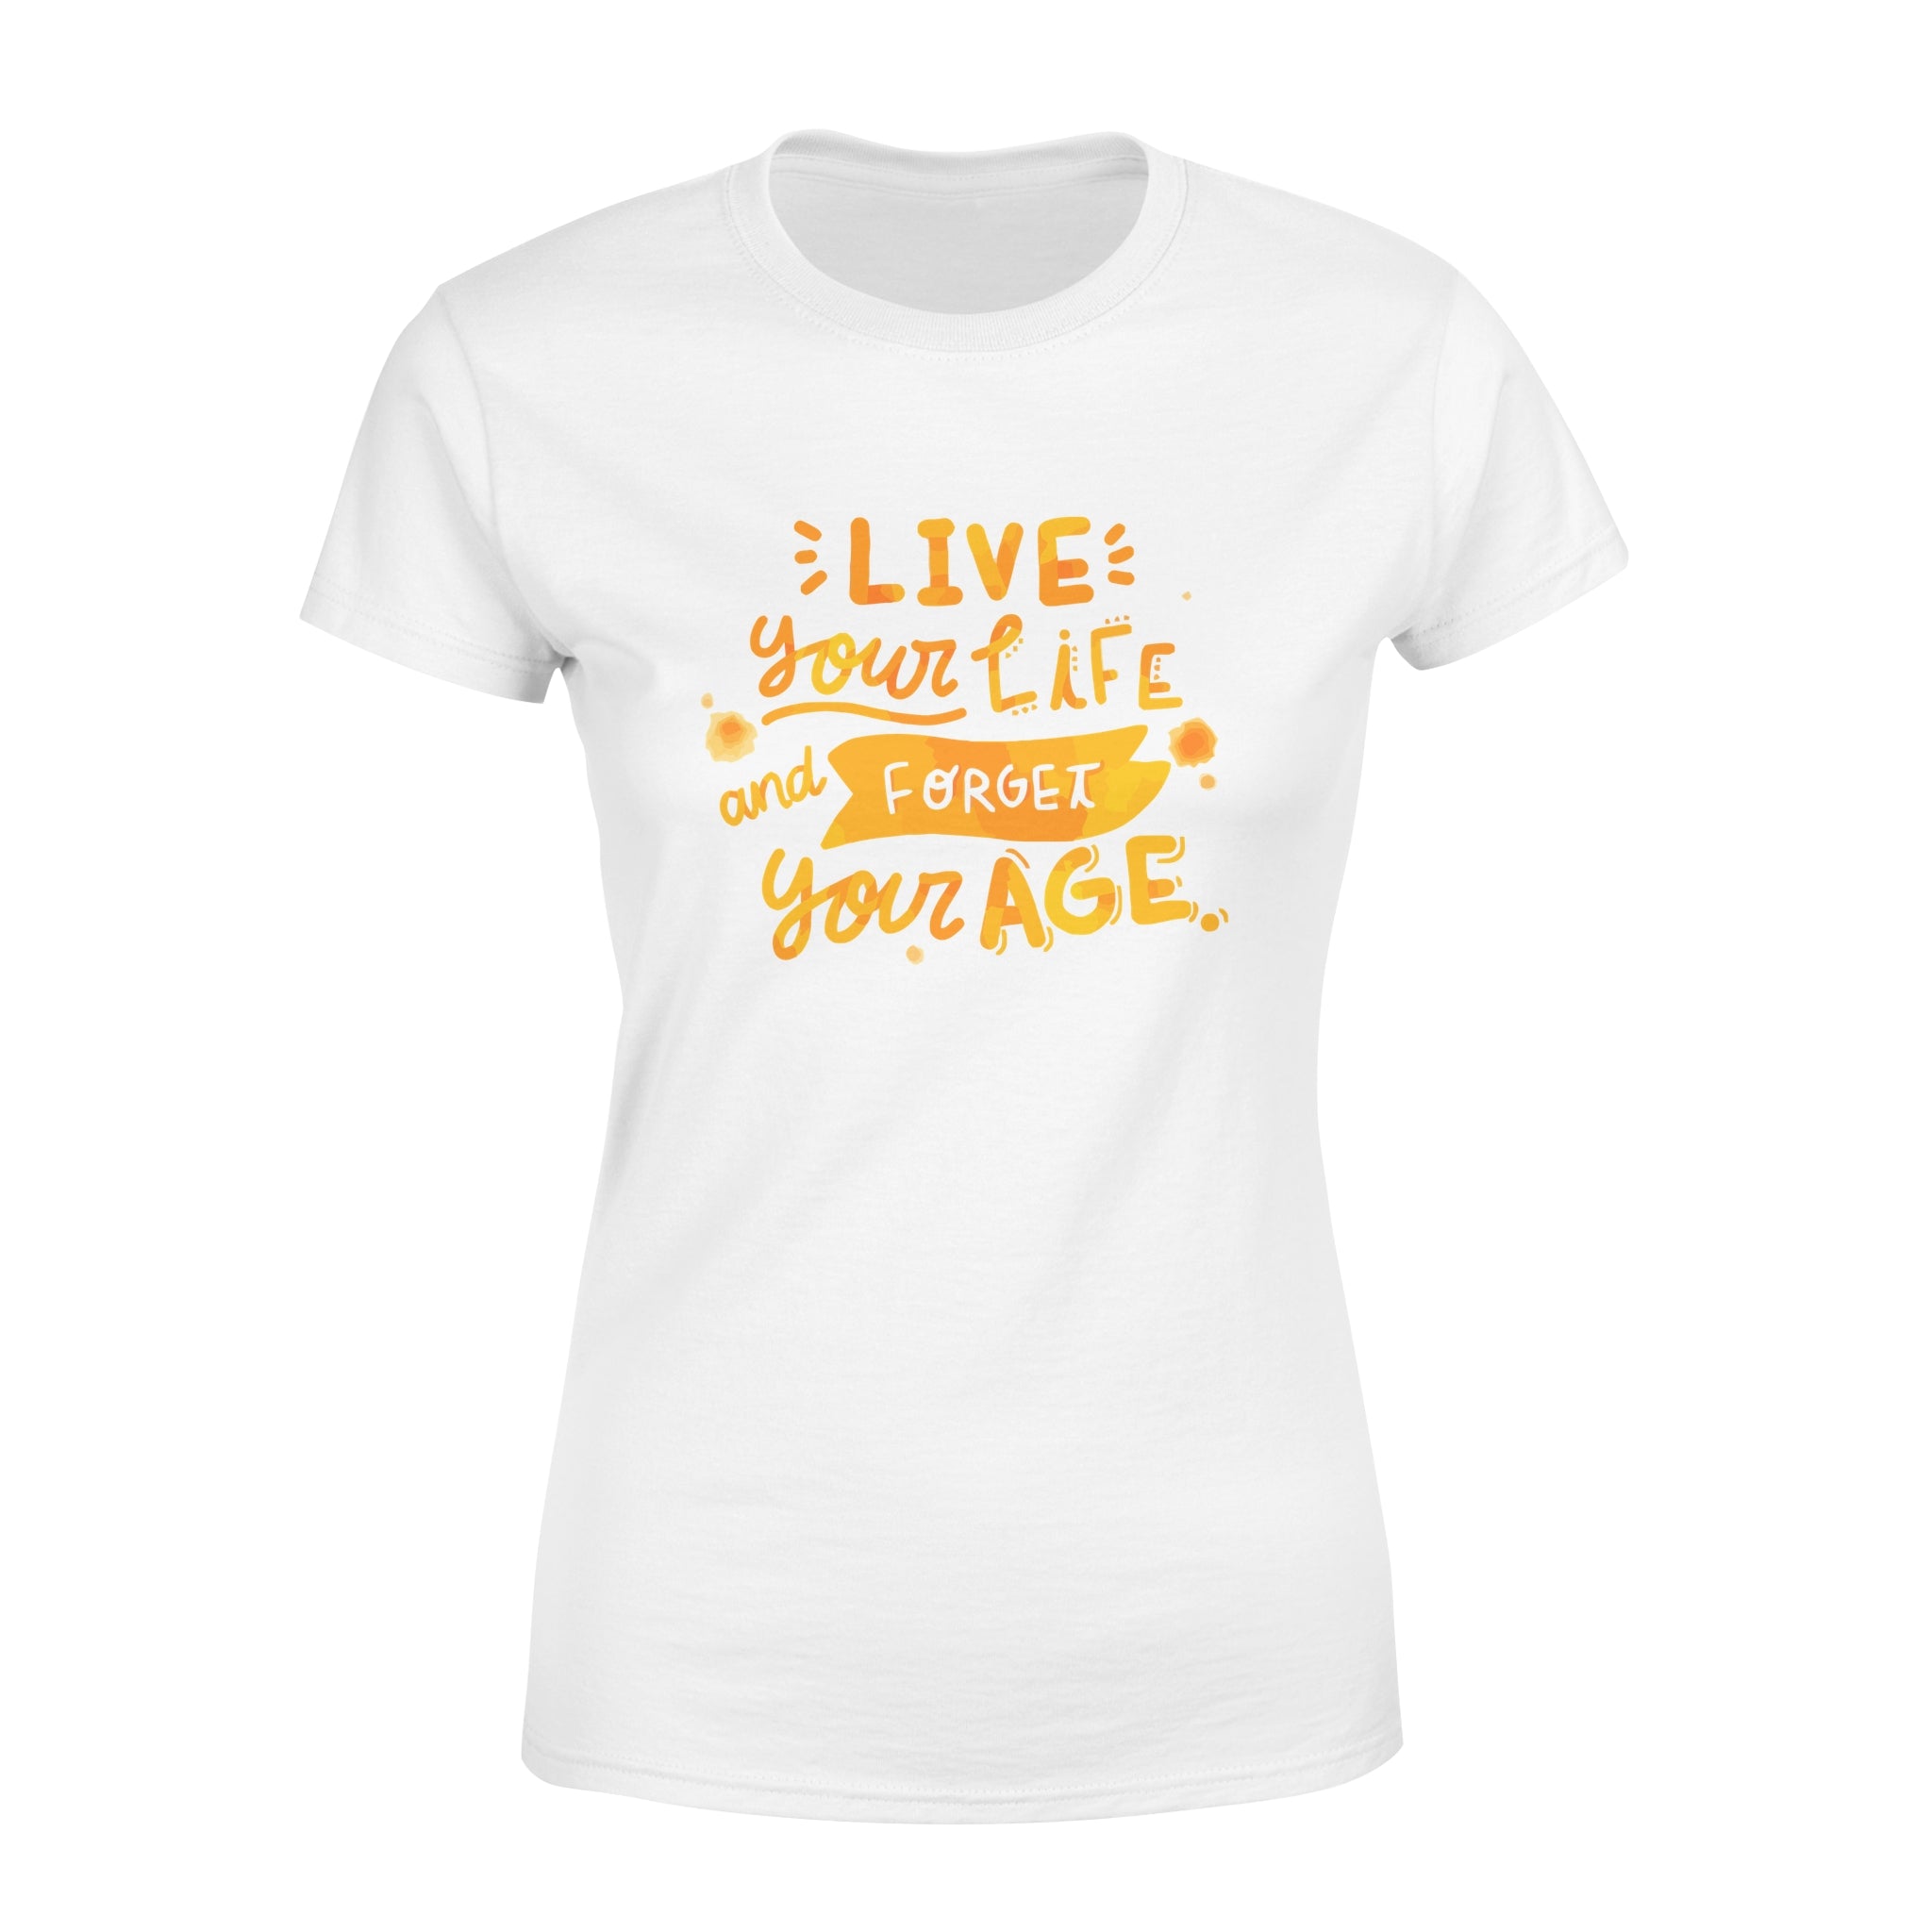 Live Your Life and Forget Your Age - Women's T-shirt